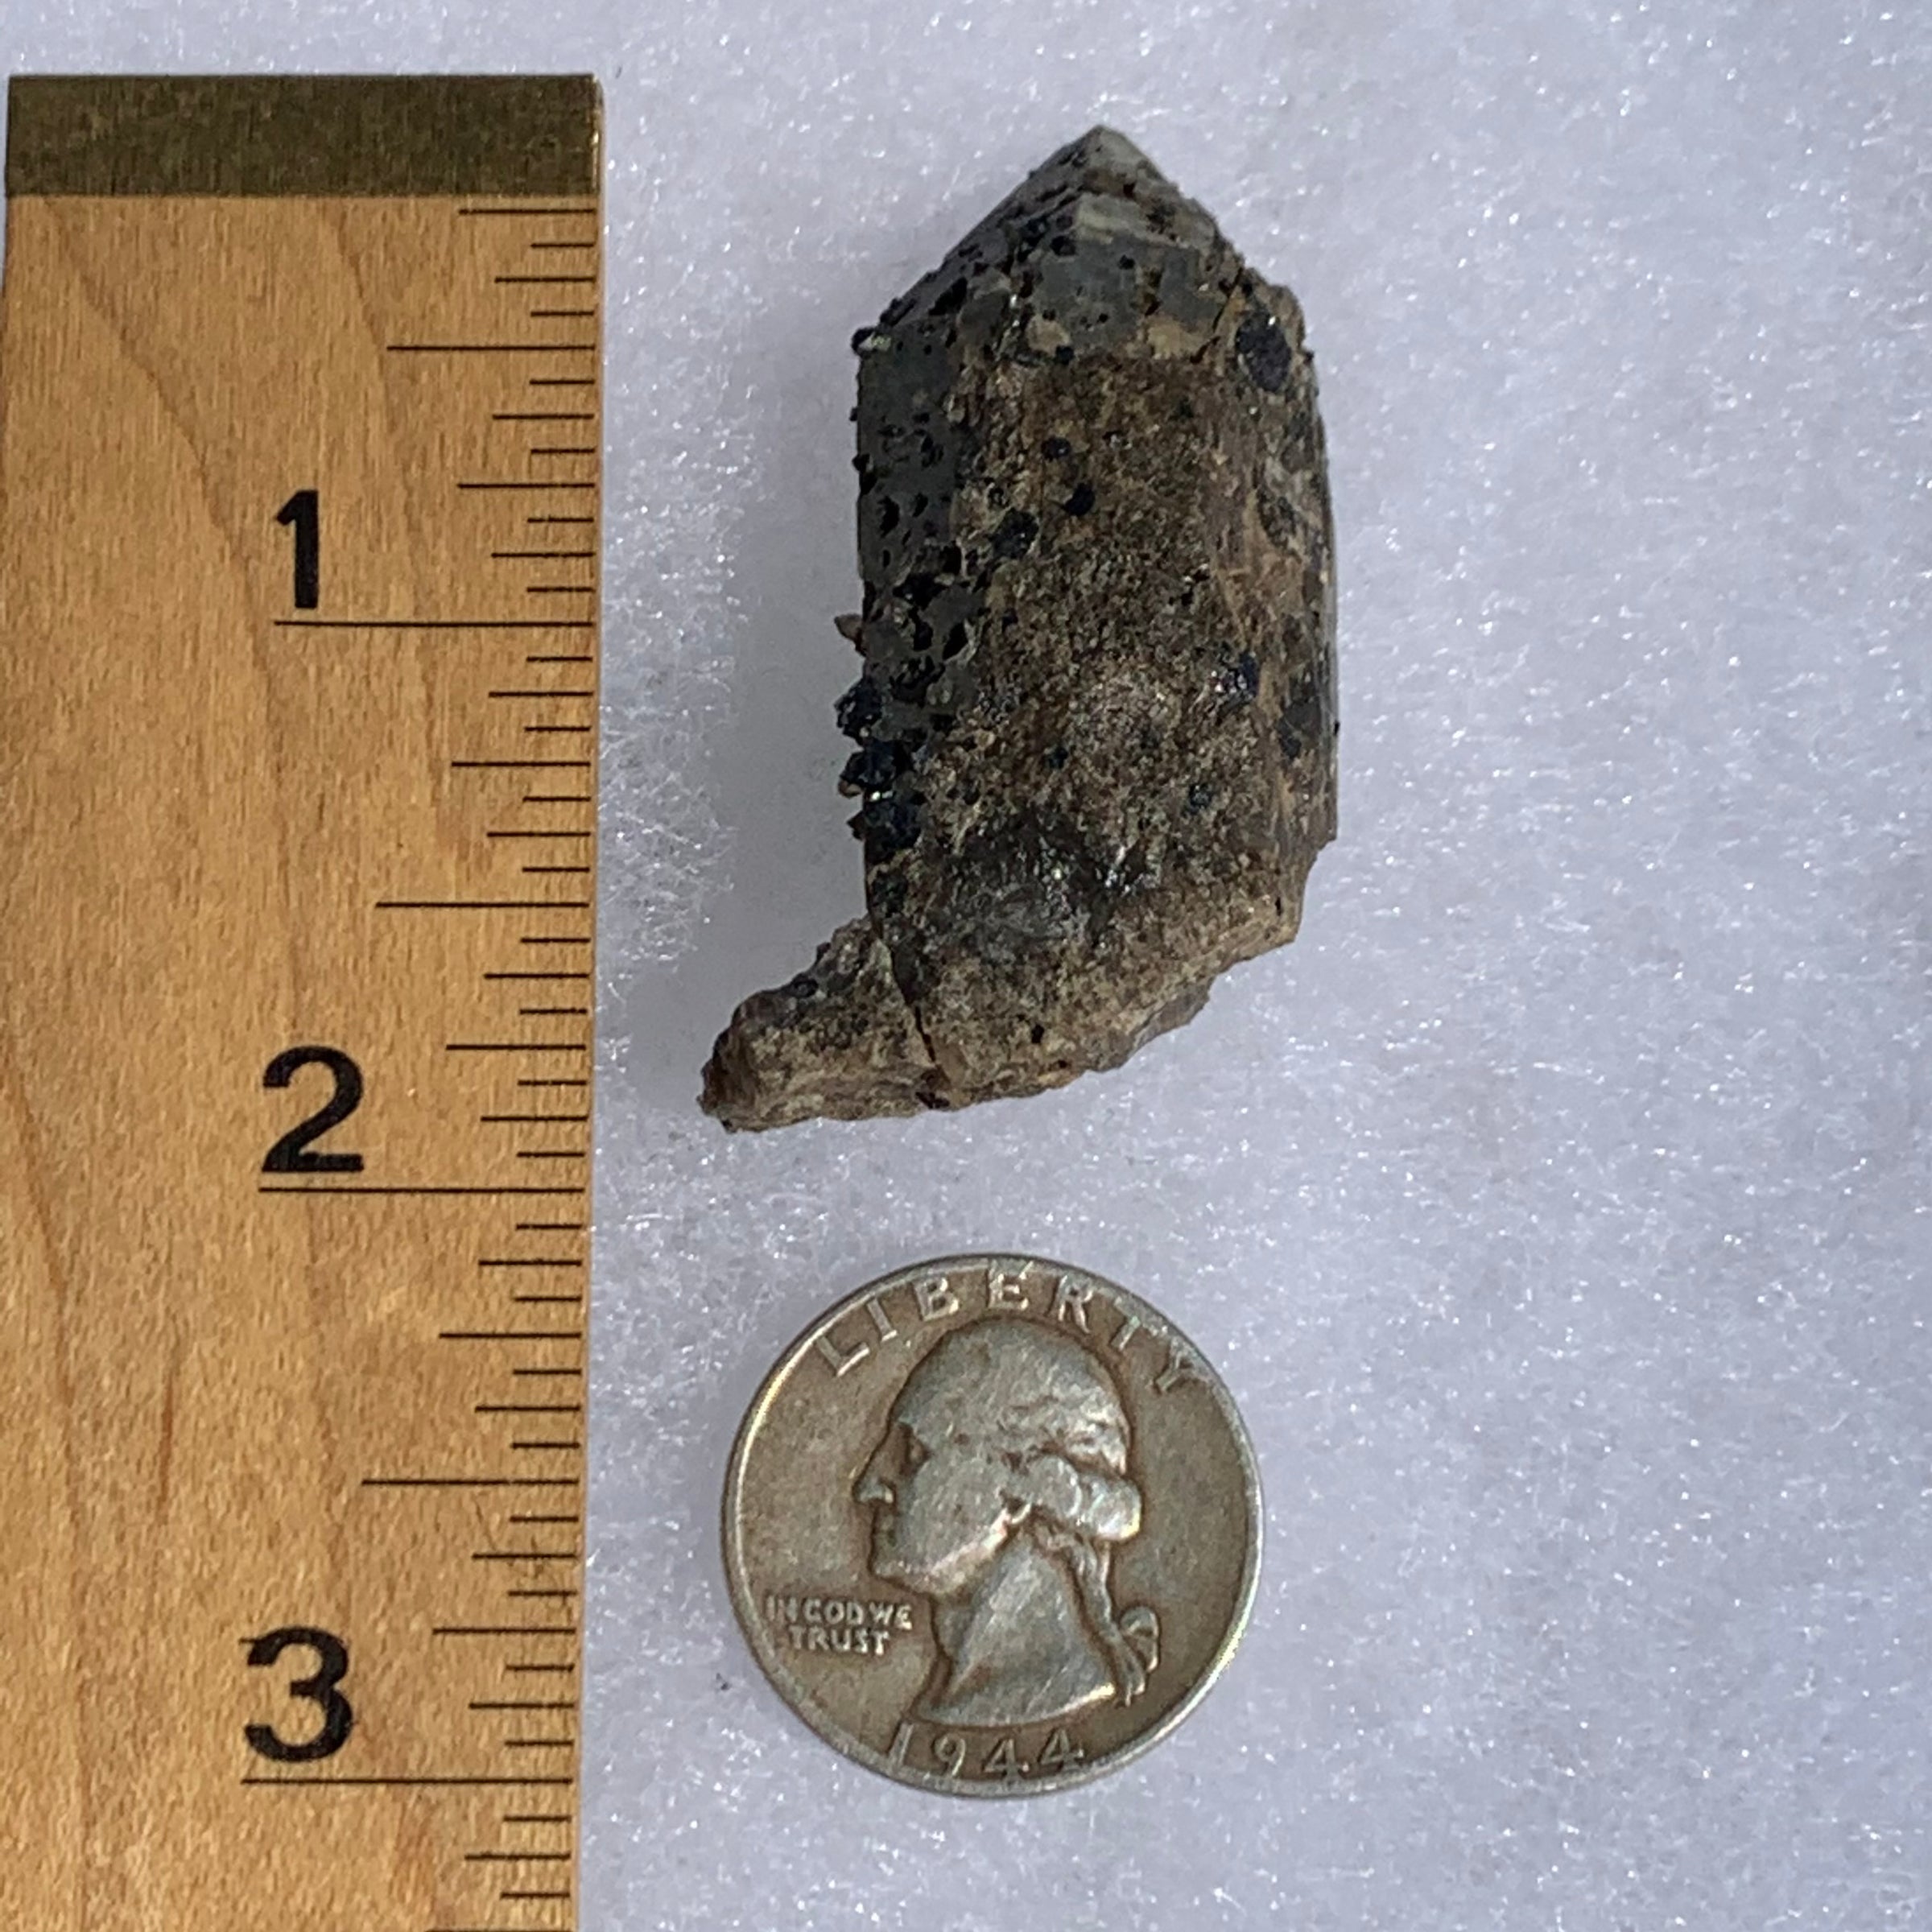 small and tiny brookite crystals on a smokey quartz point next to a ruler and a quarter for scale